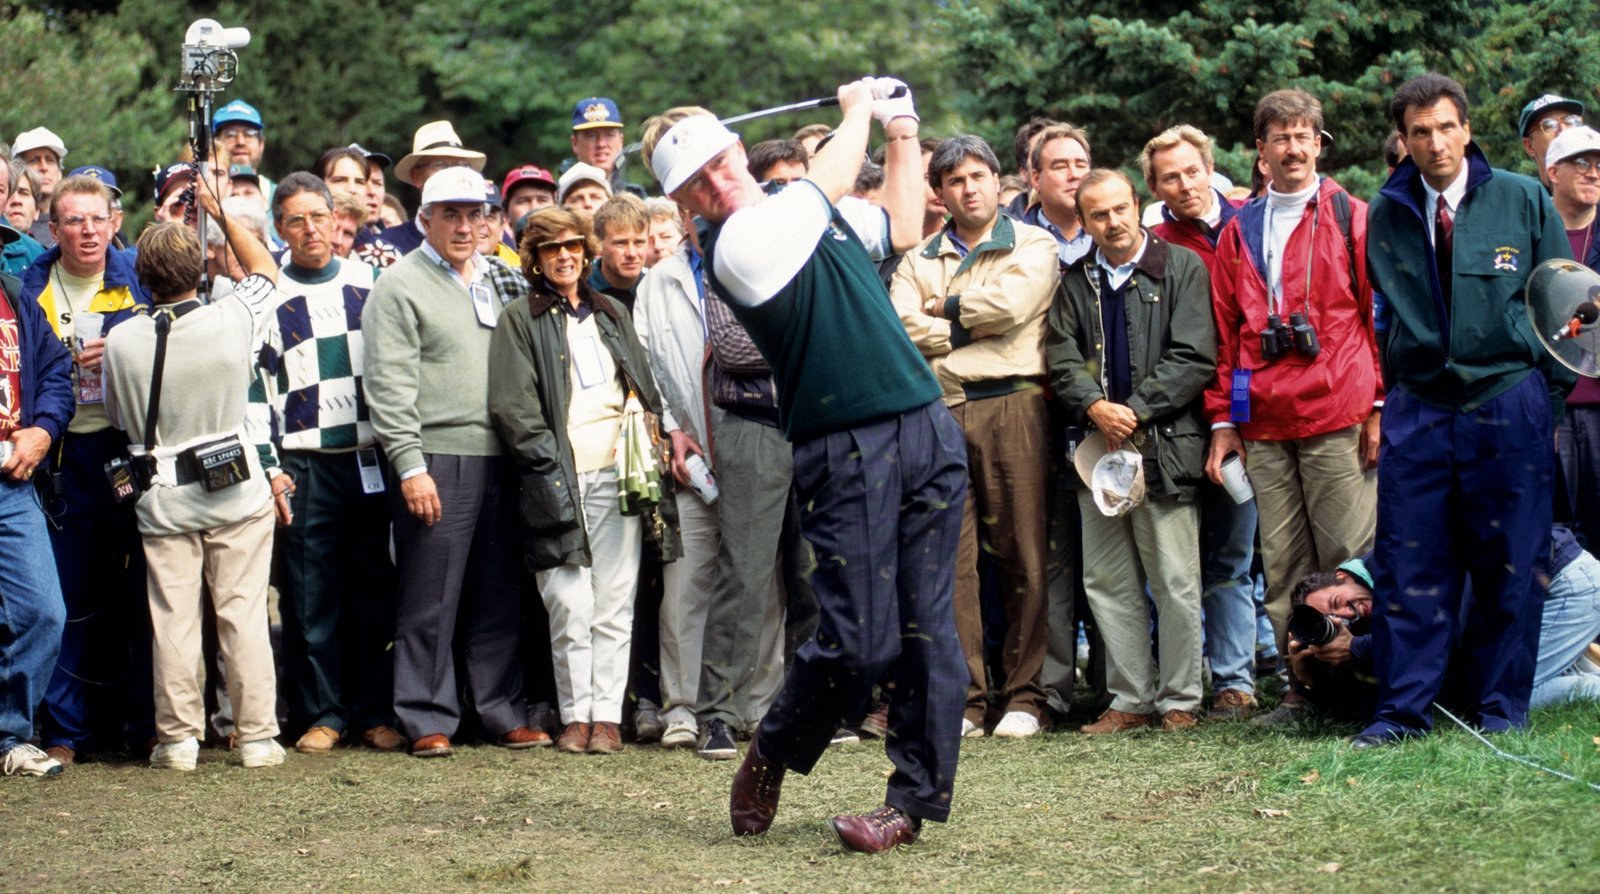 Image - Philip Walton in action in the 1995 Ryder Cup in Oak Hill